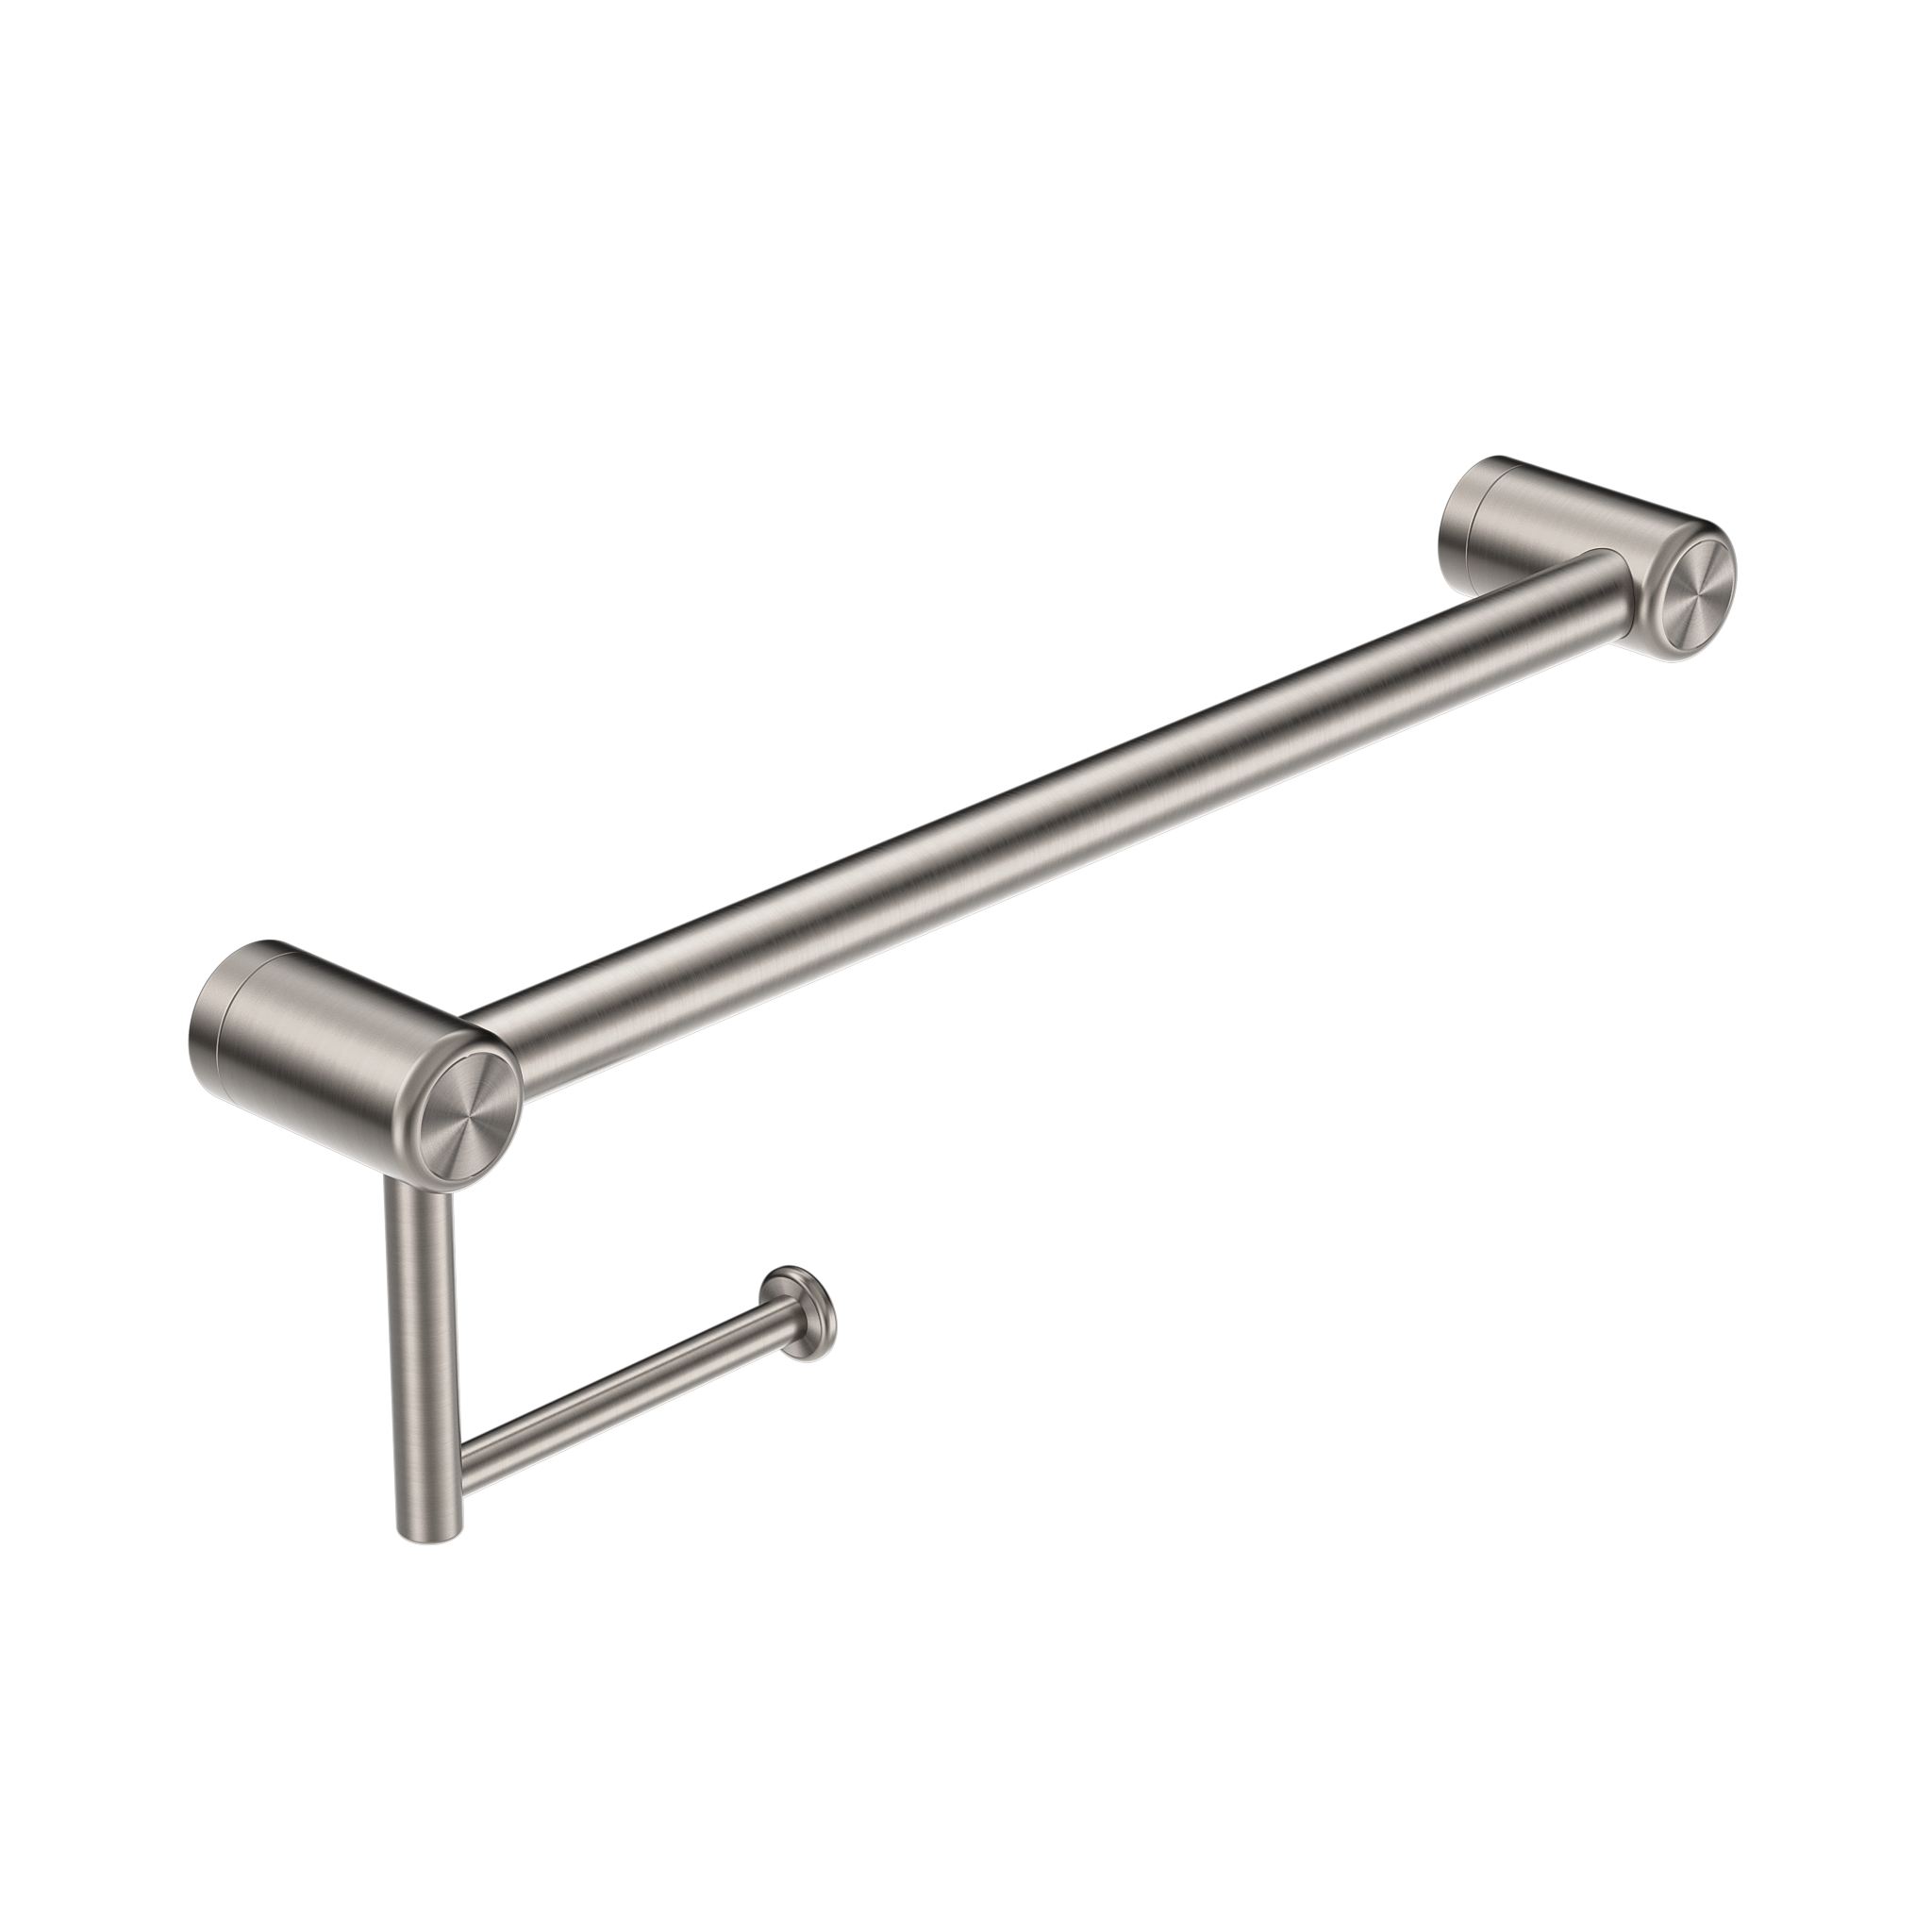 CALIBRE MECCA 25MM TOILET ROLL RAIL 450MM BRUSHED NICKEL